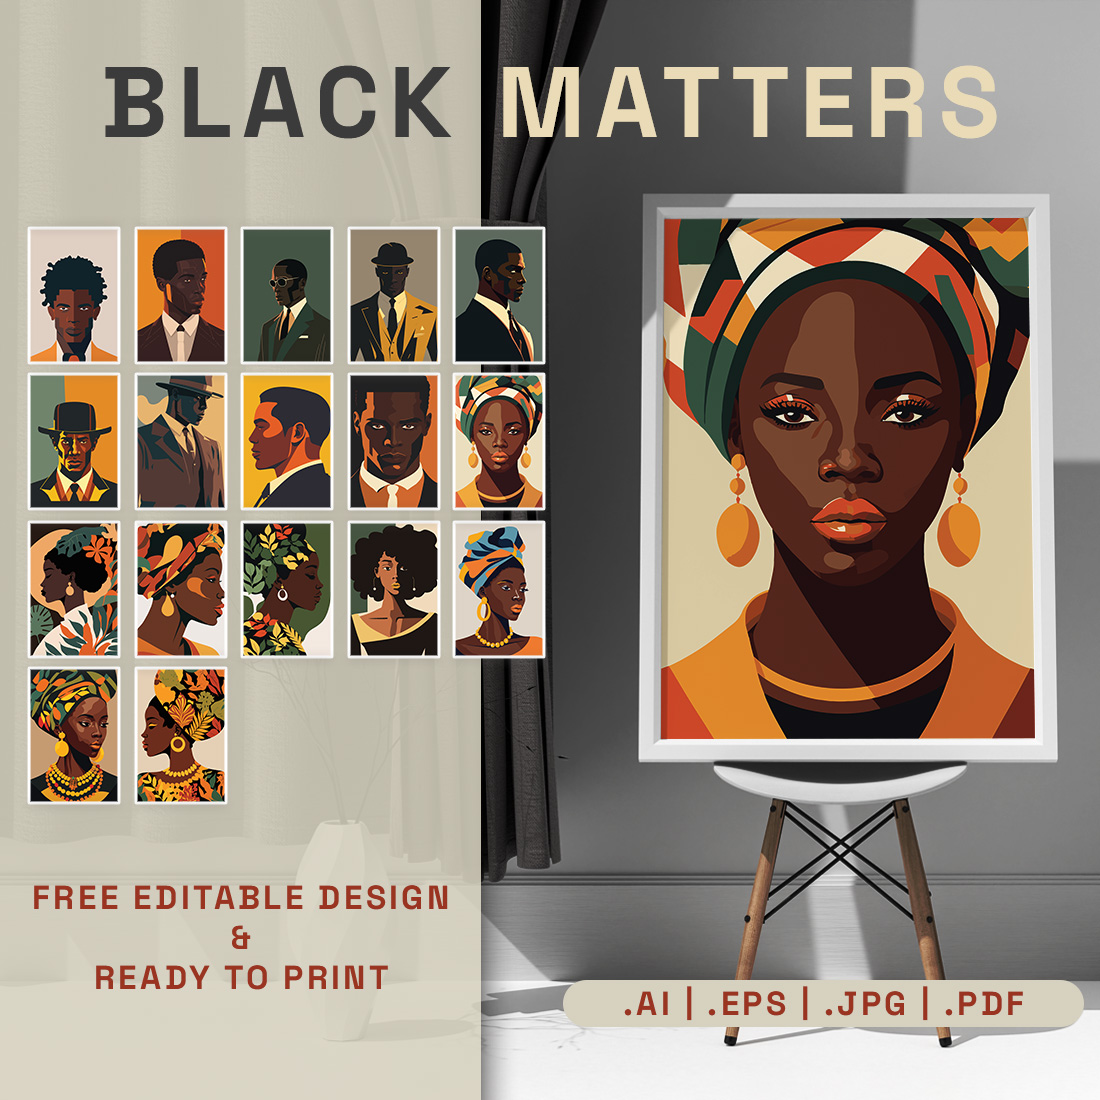 Black Excellence, Stylish and Modern Illustrations Celebrating Black Culture cover image.